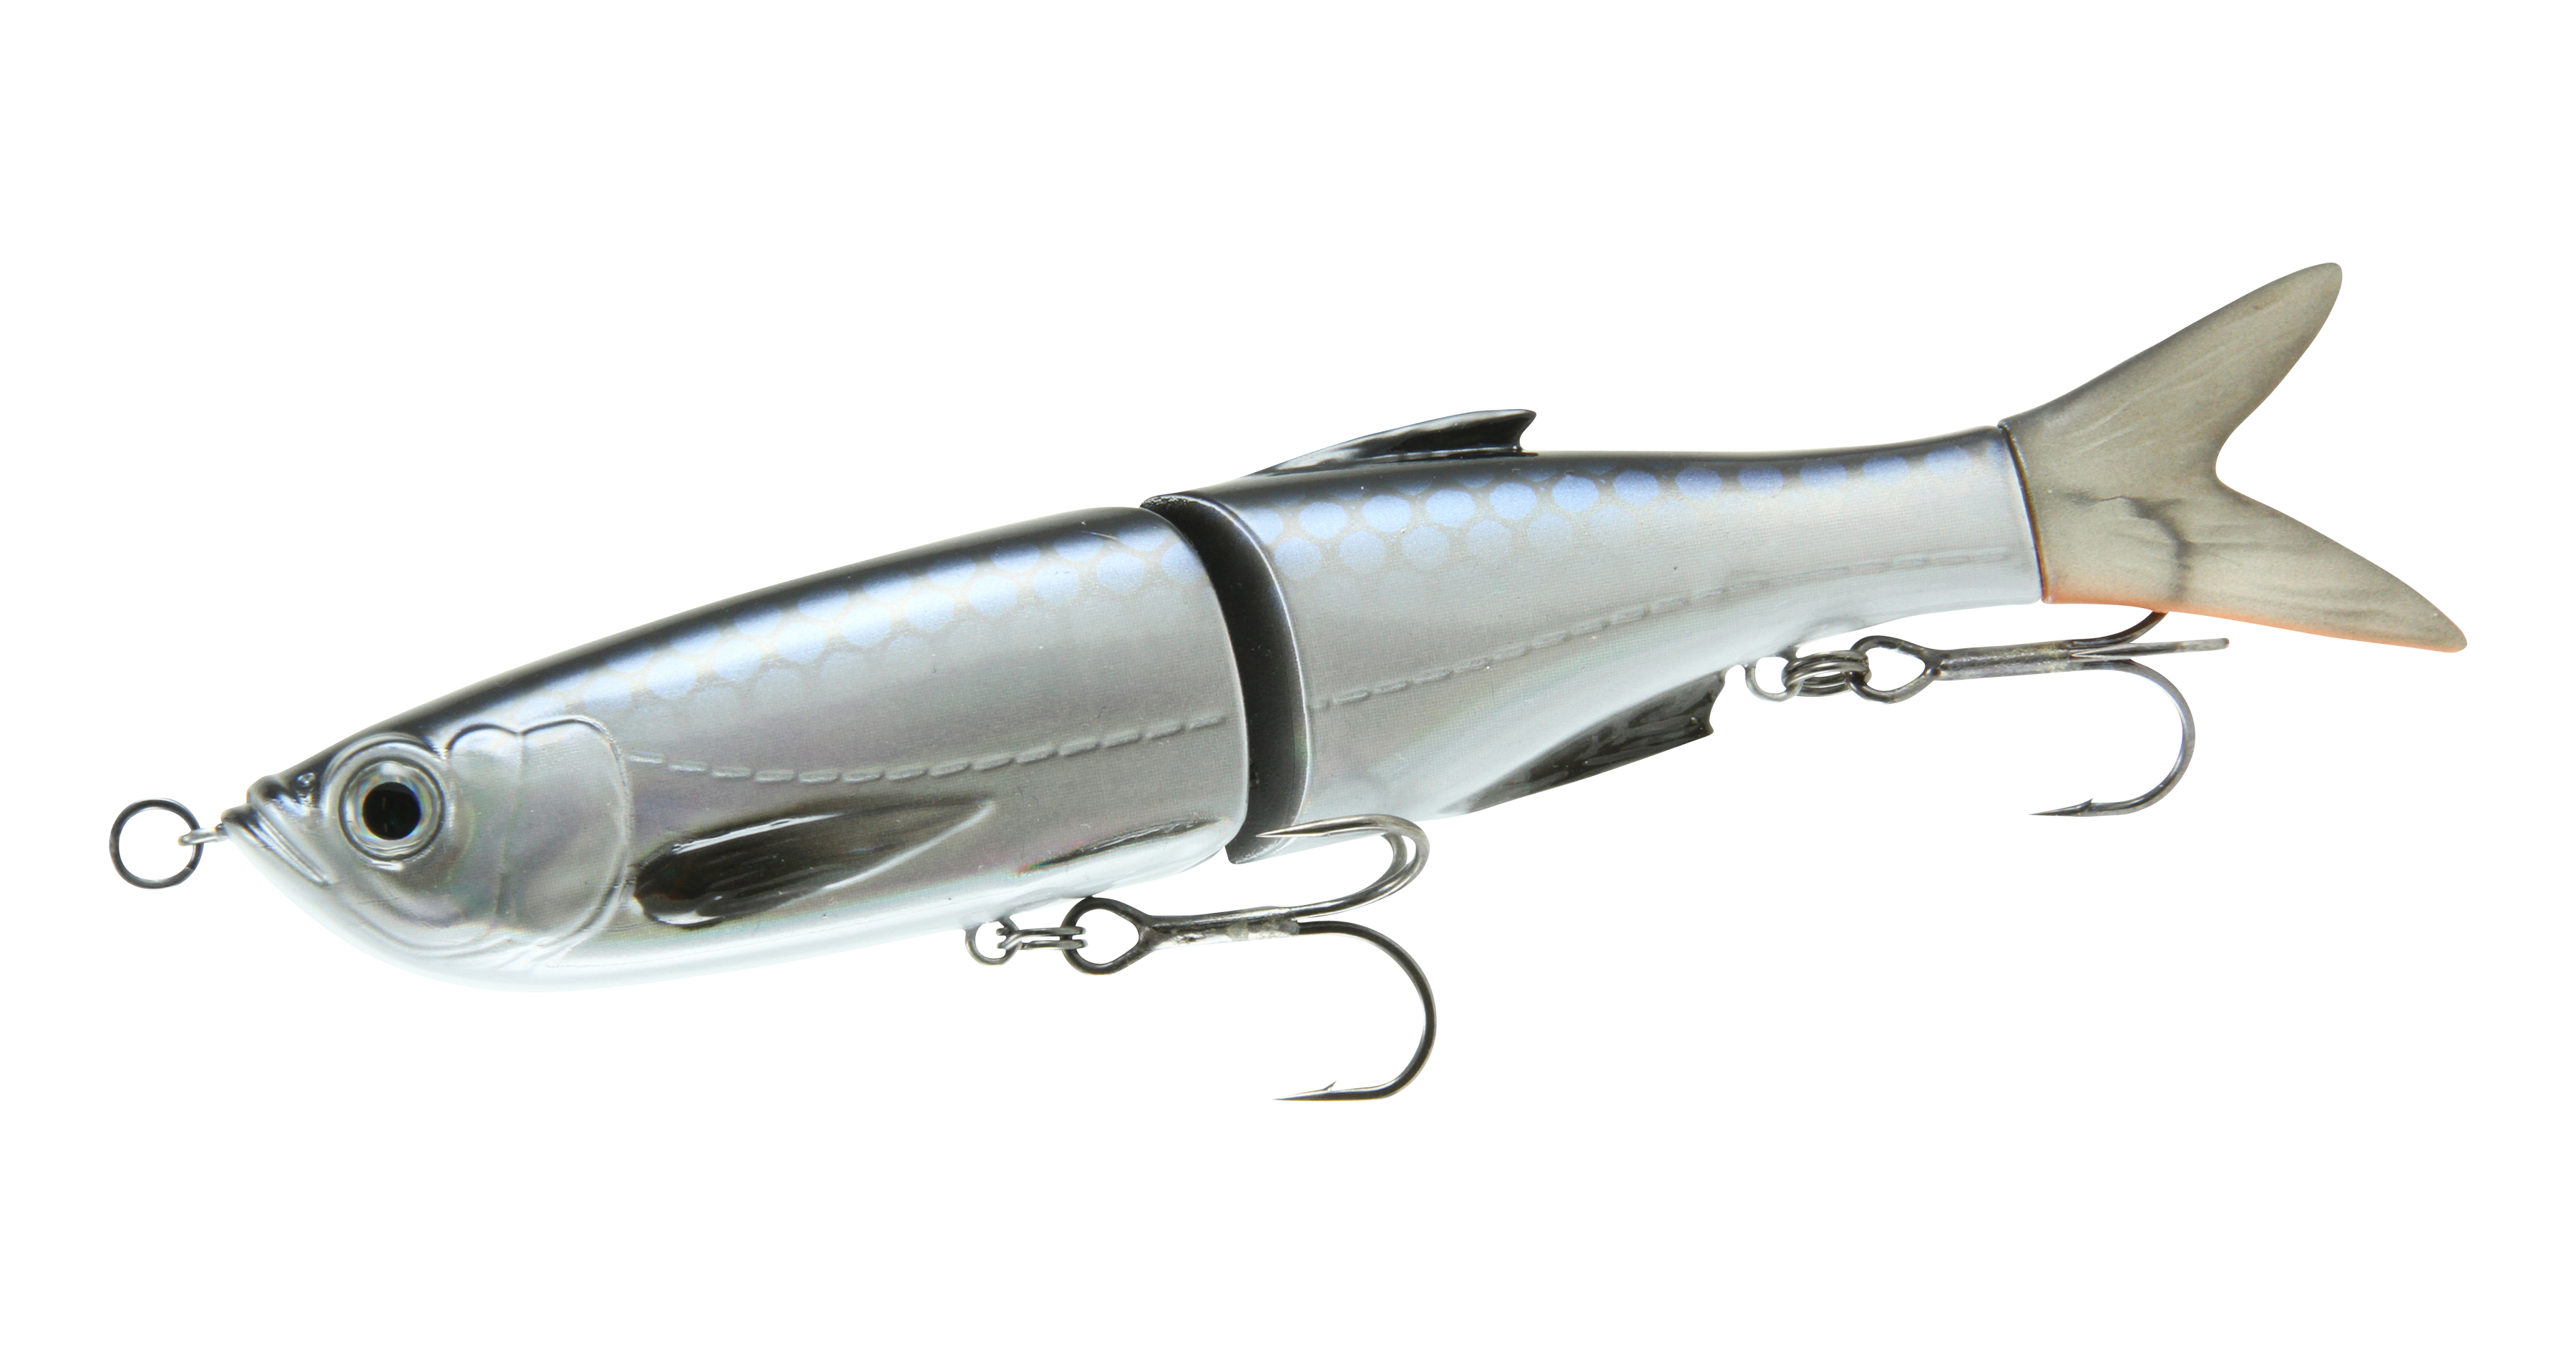 Savage Gear 3D Jointed Glide Swimmer Hard Body Swimbait